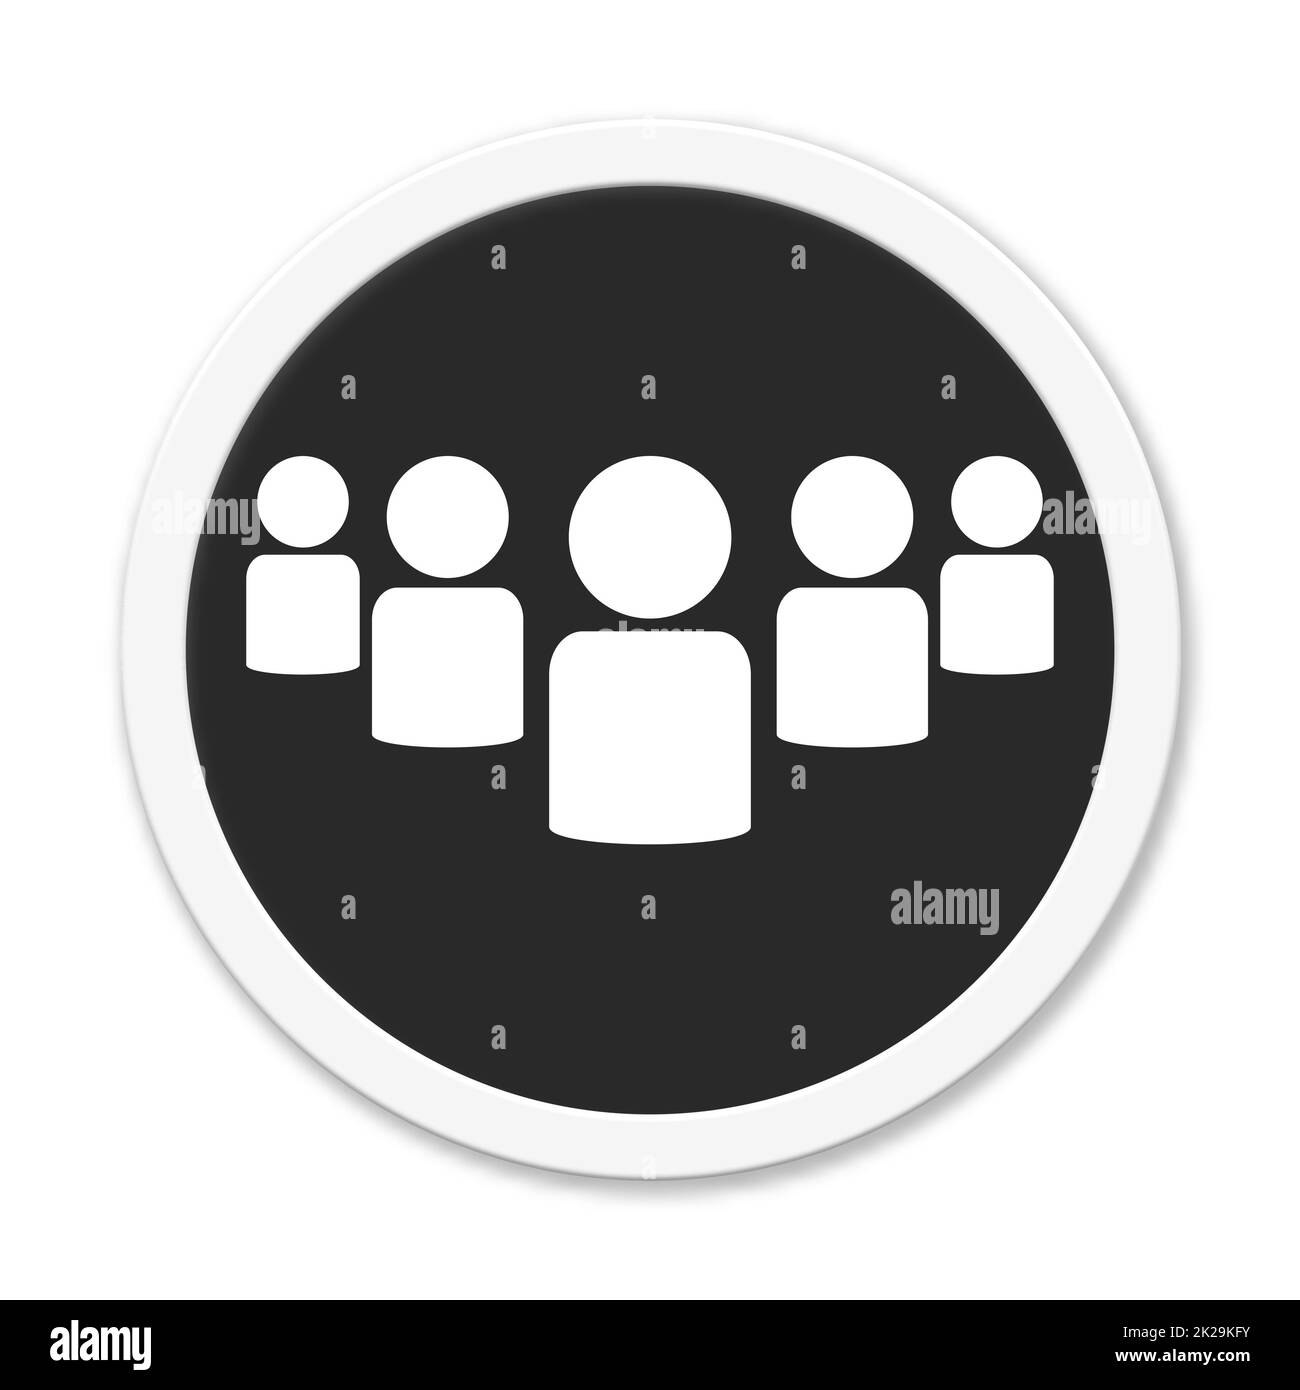 Black button with white frame: Community or Group Stock Photo